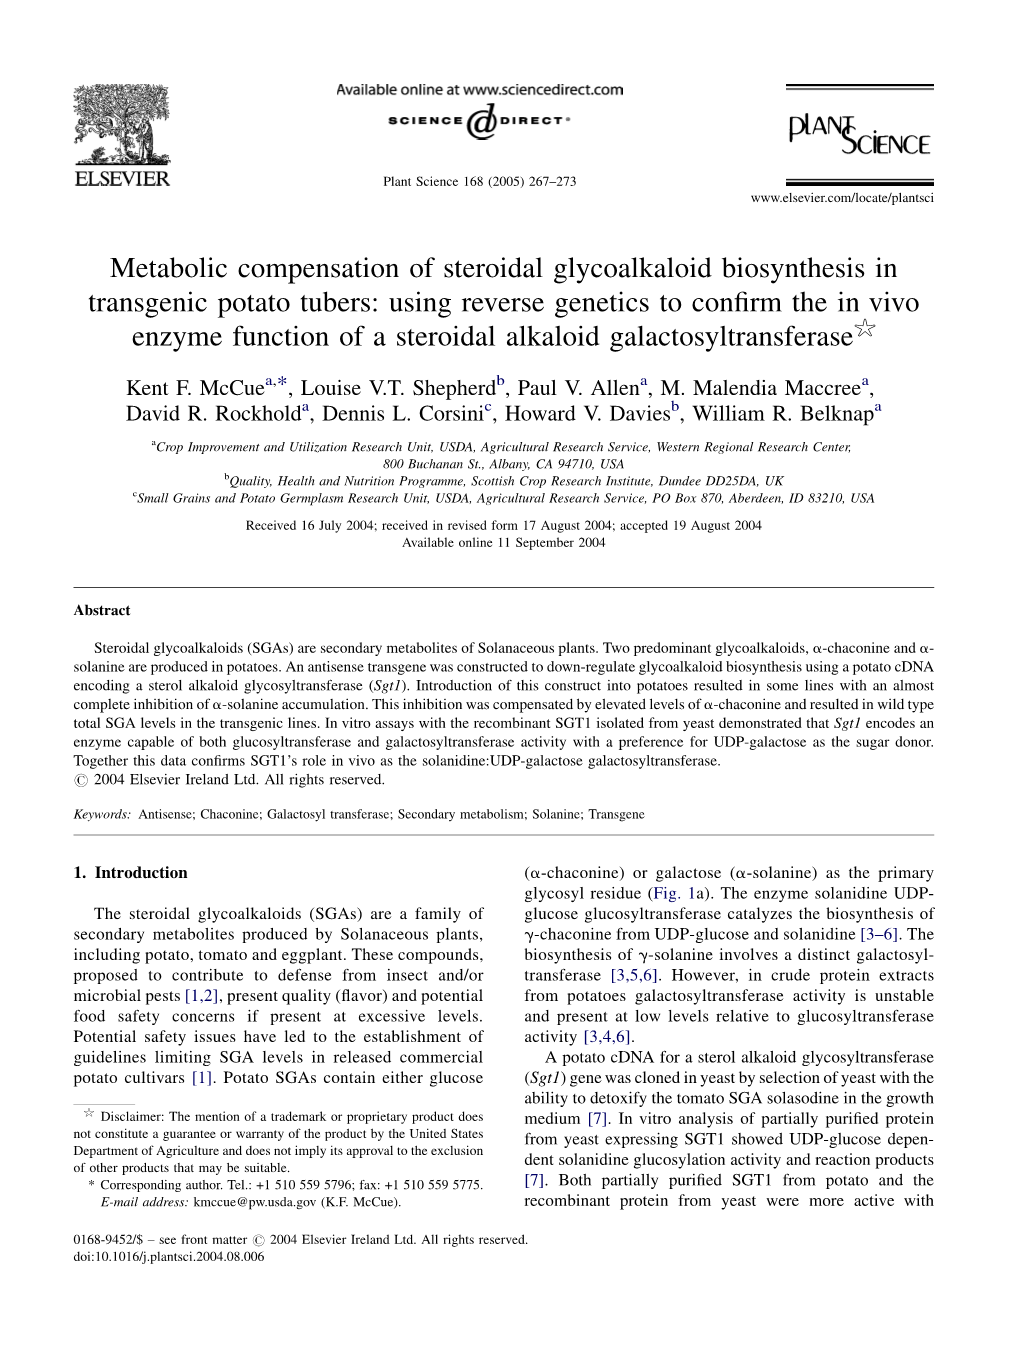 Metabolic Compensation of Steroidal Glycoalkaloid Biosynthesis